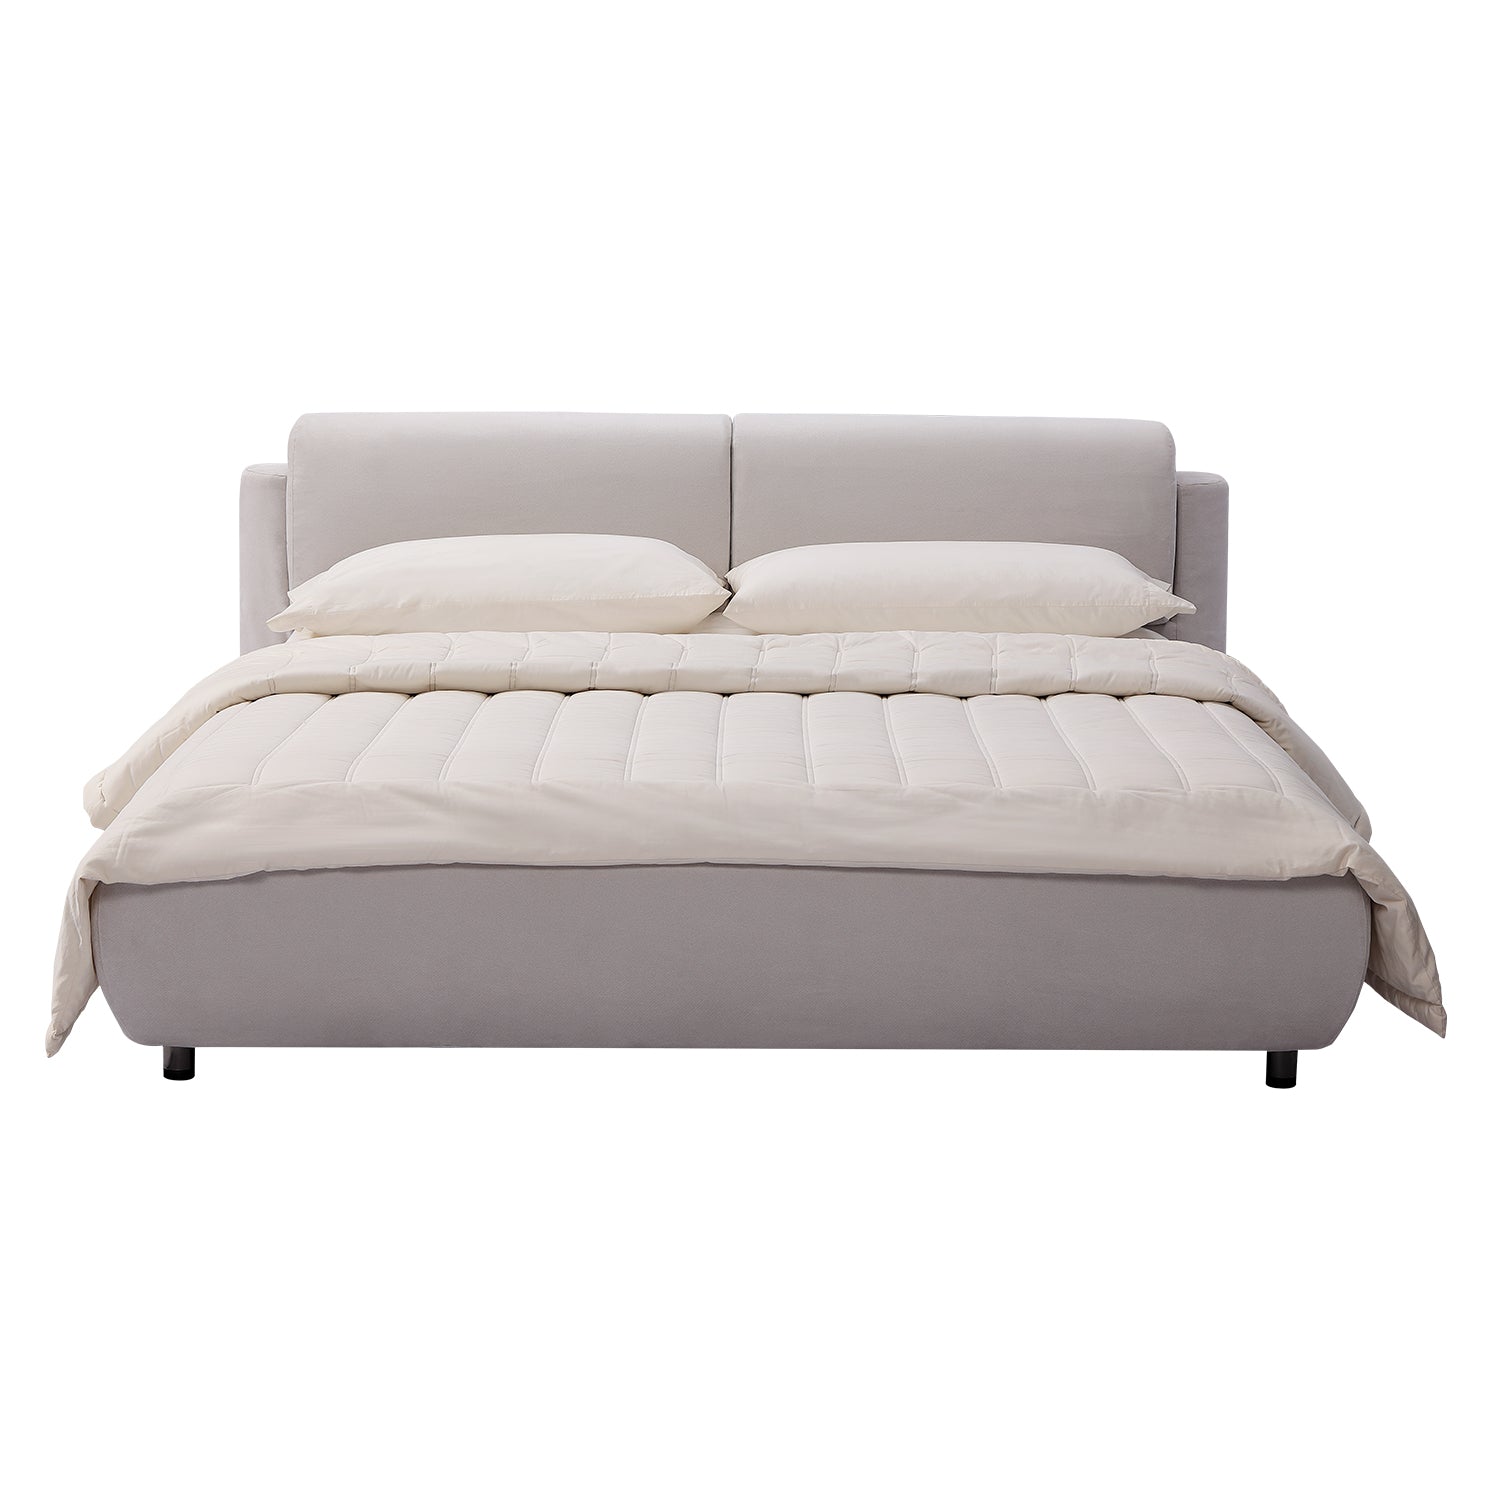 DeRUCCI Bed Frame BZZ4 - 082 in light gray fabric with a minimalist European-inspired design, featuring a padded headboard and a cream-colored comforter and pillows.